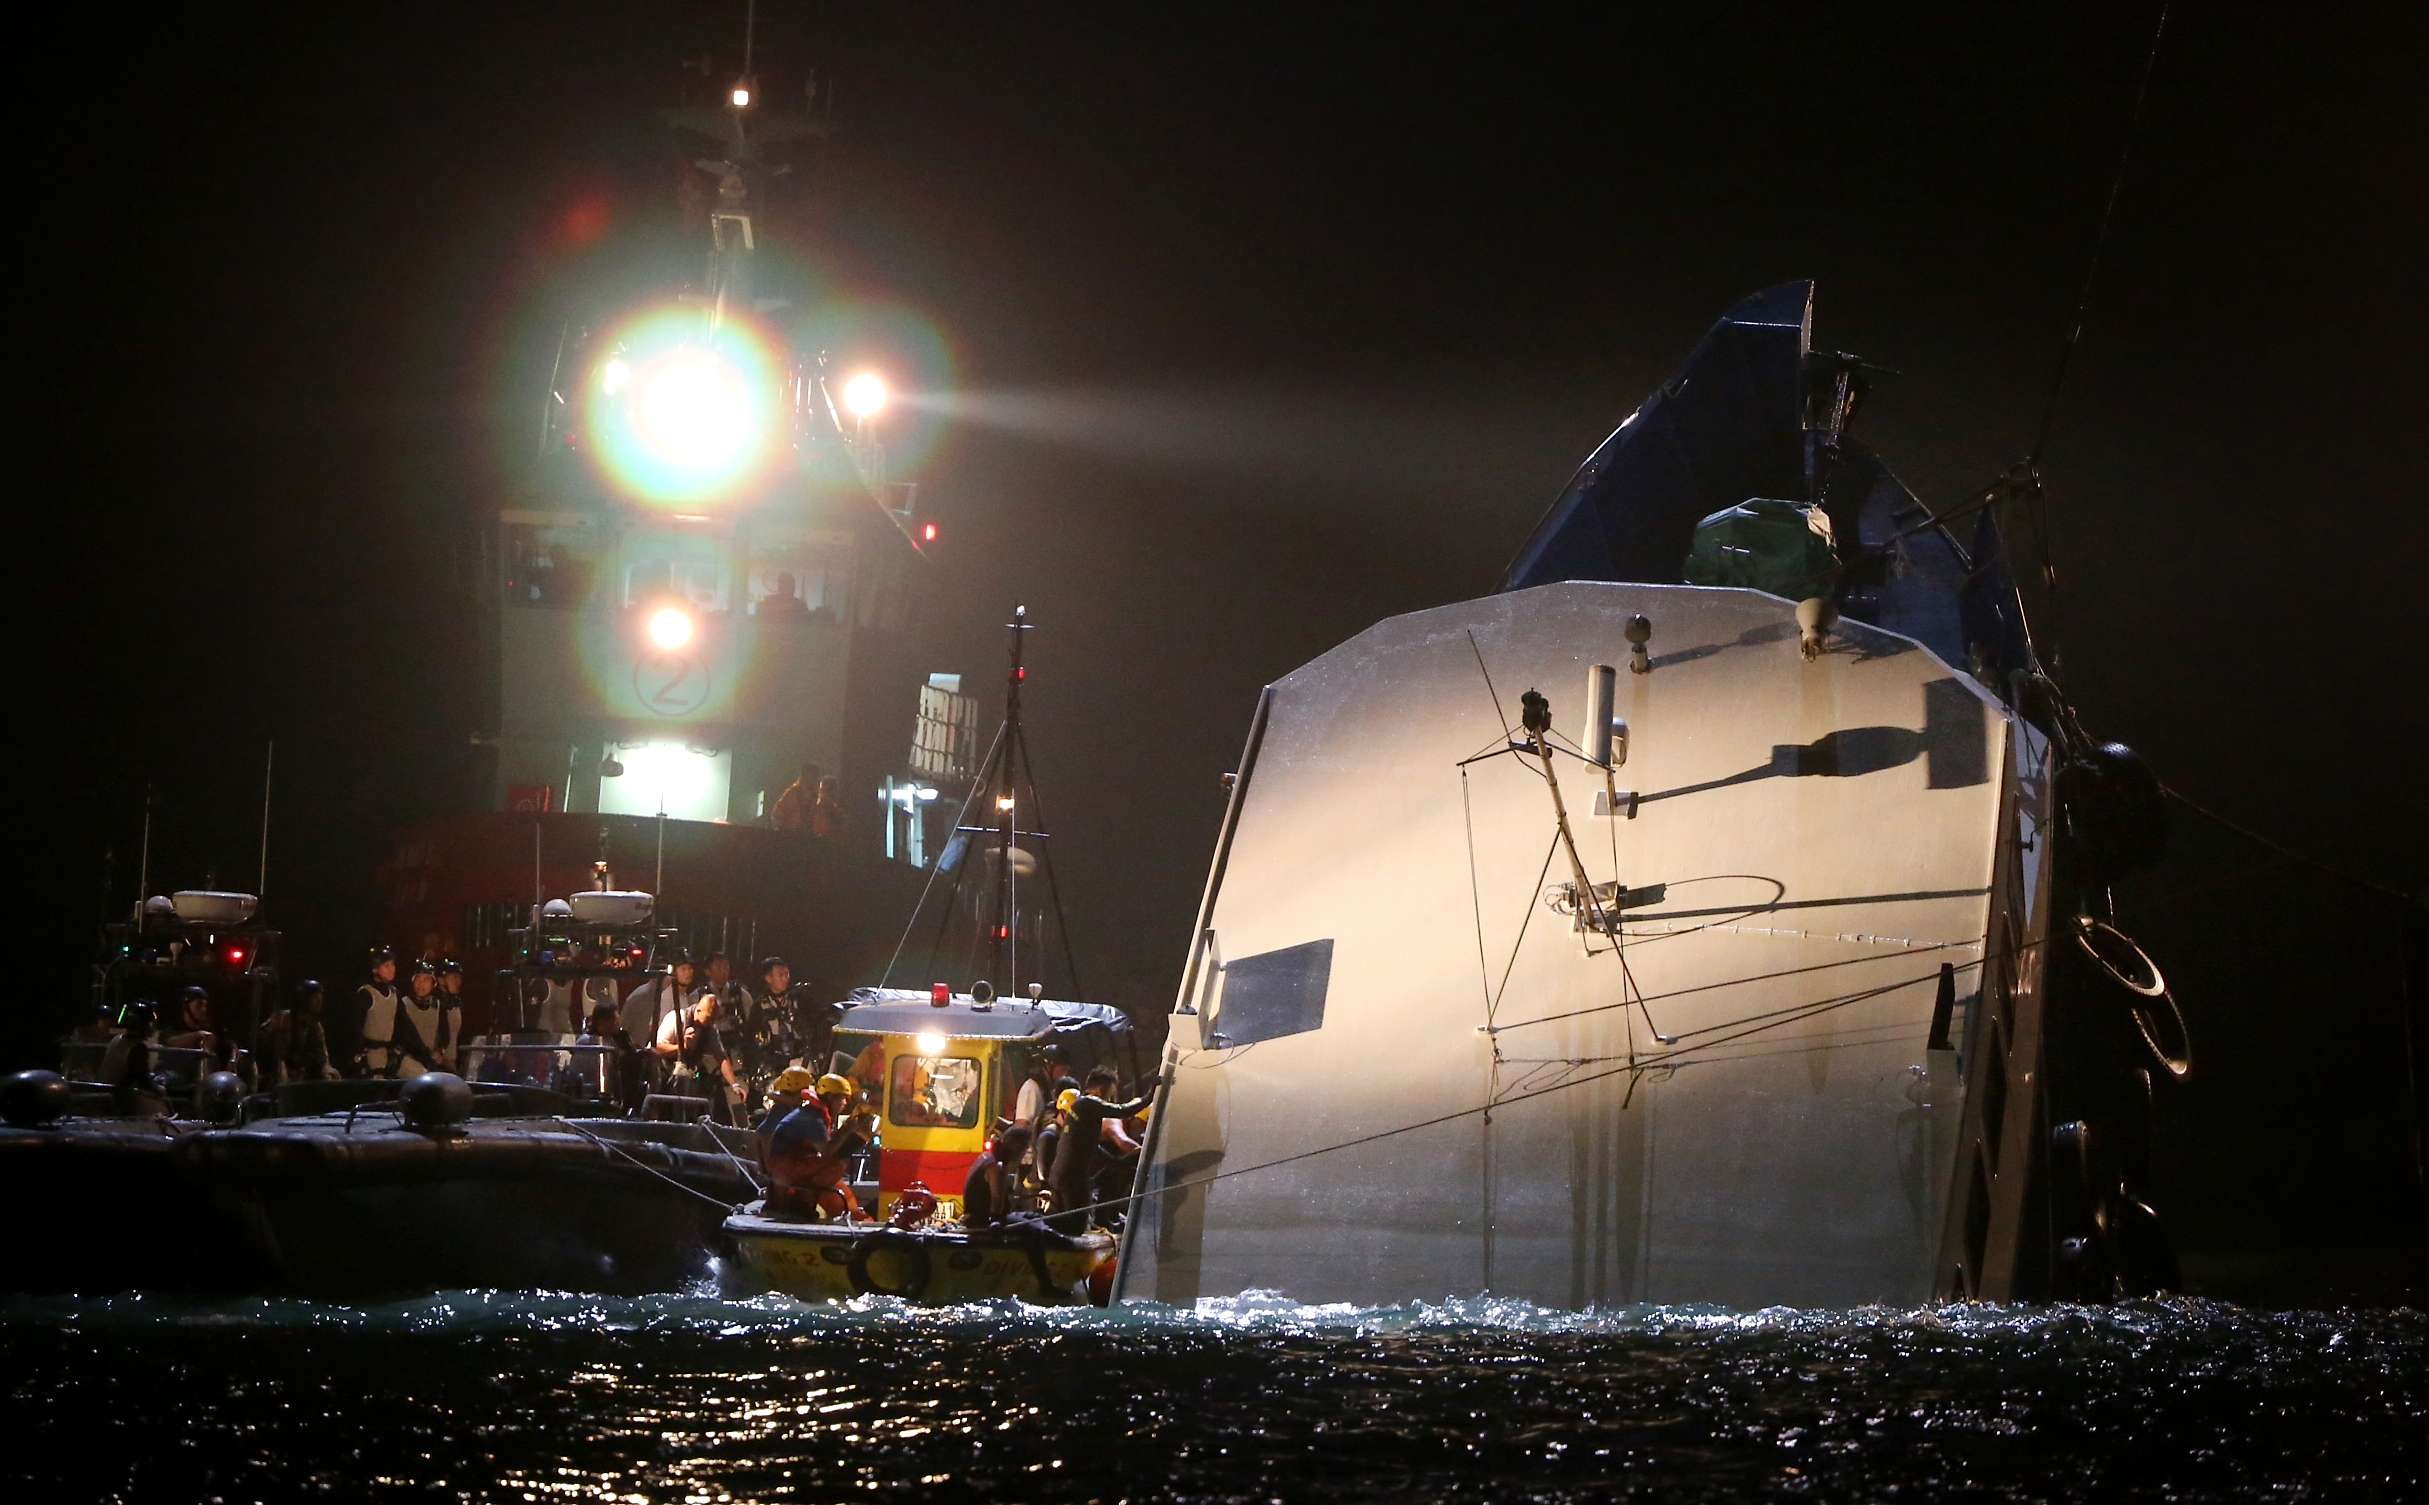 Rescue operation on October 1, 2012, the night that the Lamma IV and the Sea Smooth collided, killing 39 people. Photo: SCMP Pictures.